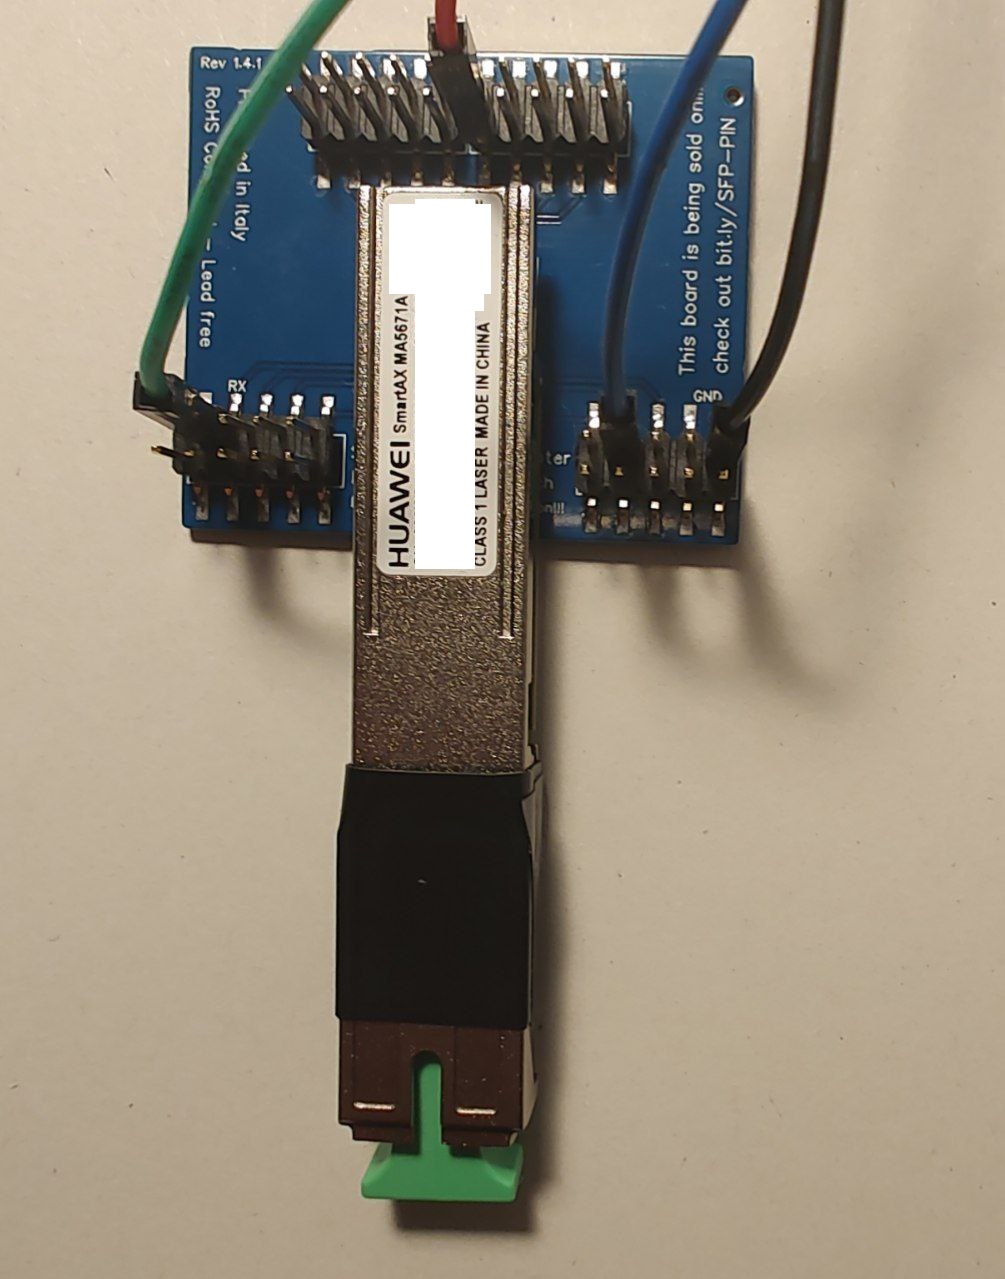 Example of how the SFP - molex SFP connection should look like